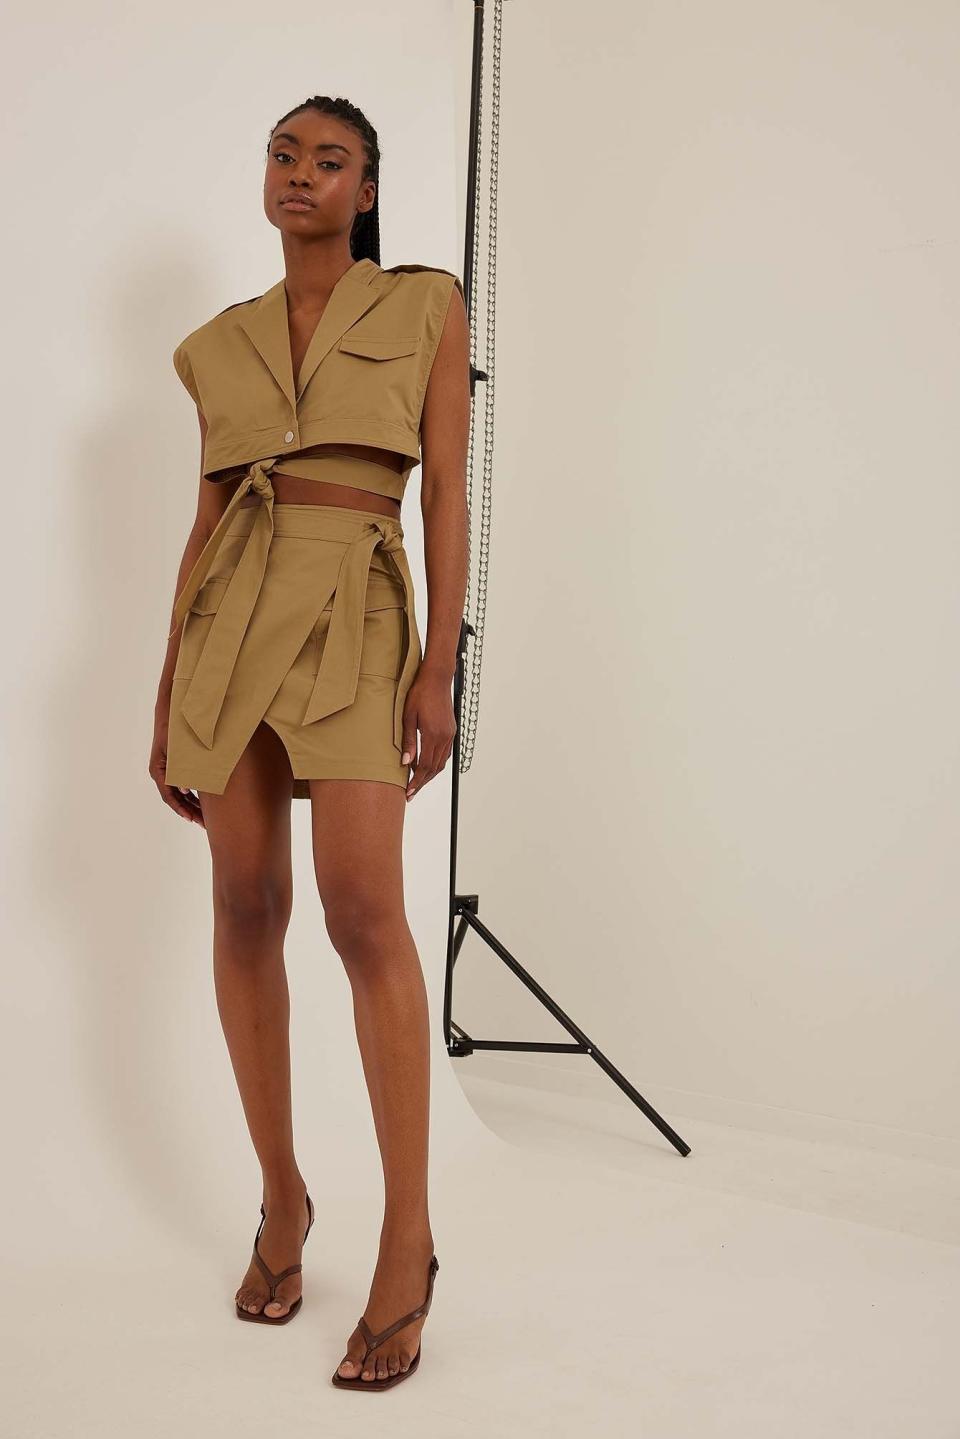 Angelica Blick x NA-KD Wrapped Trench Skirt